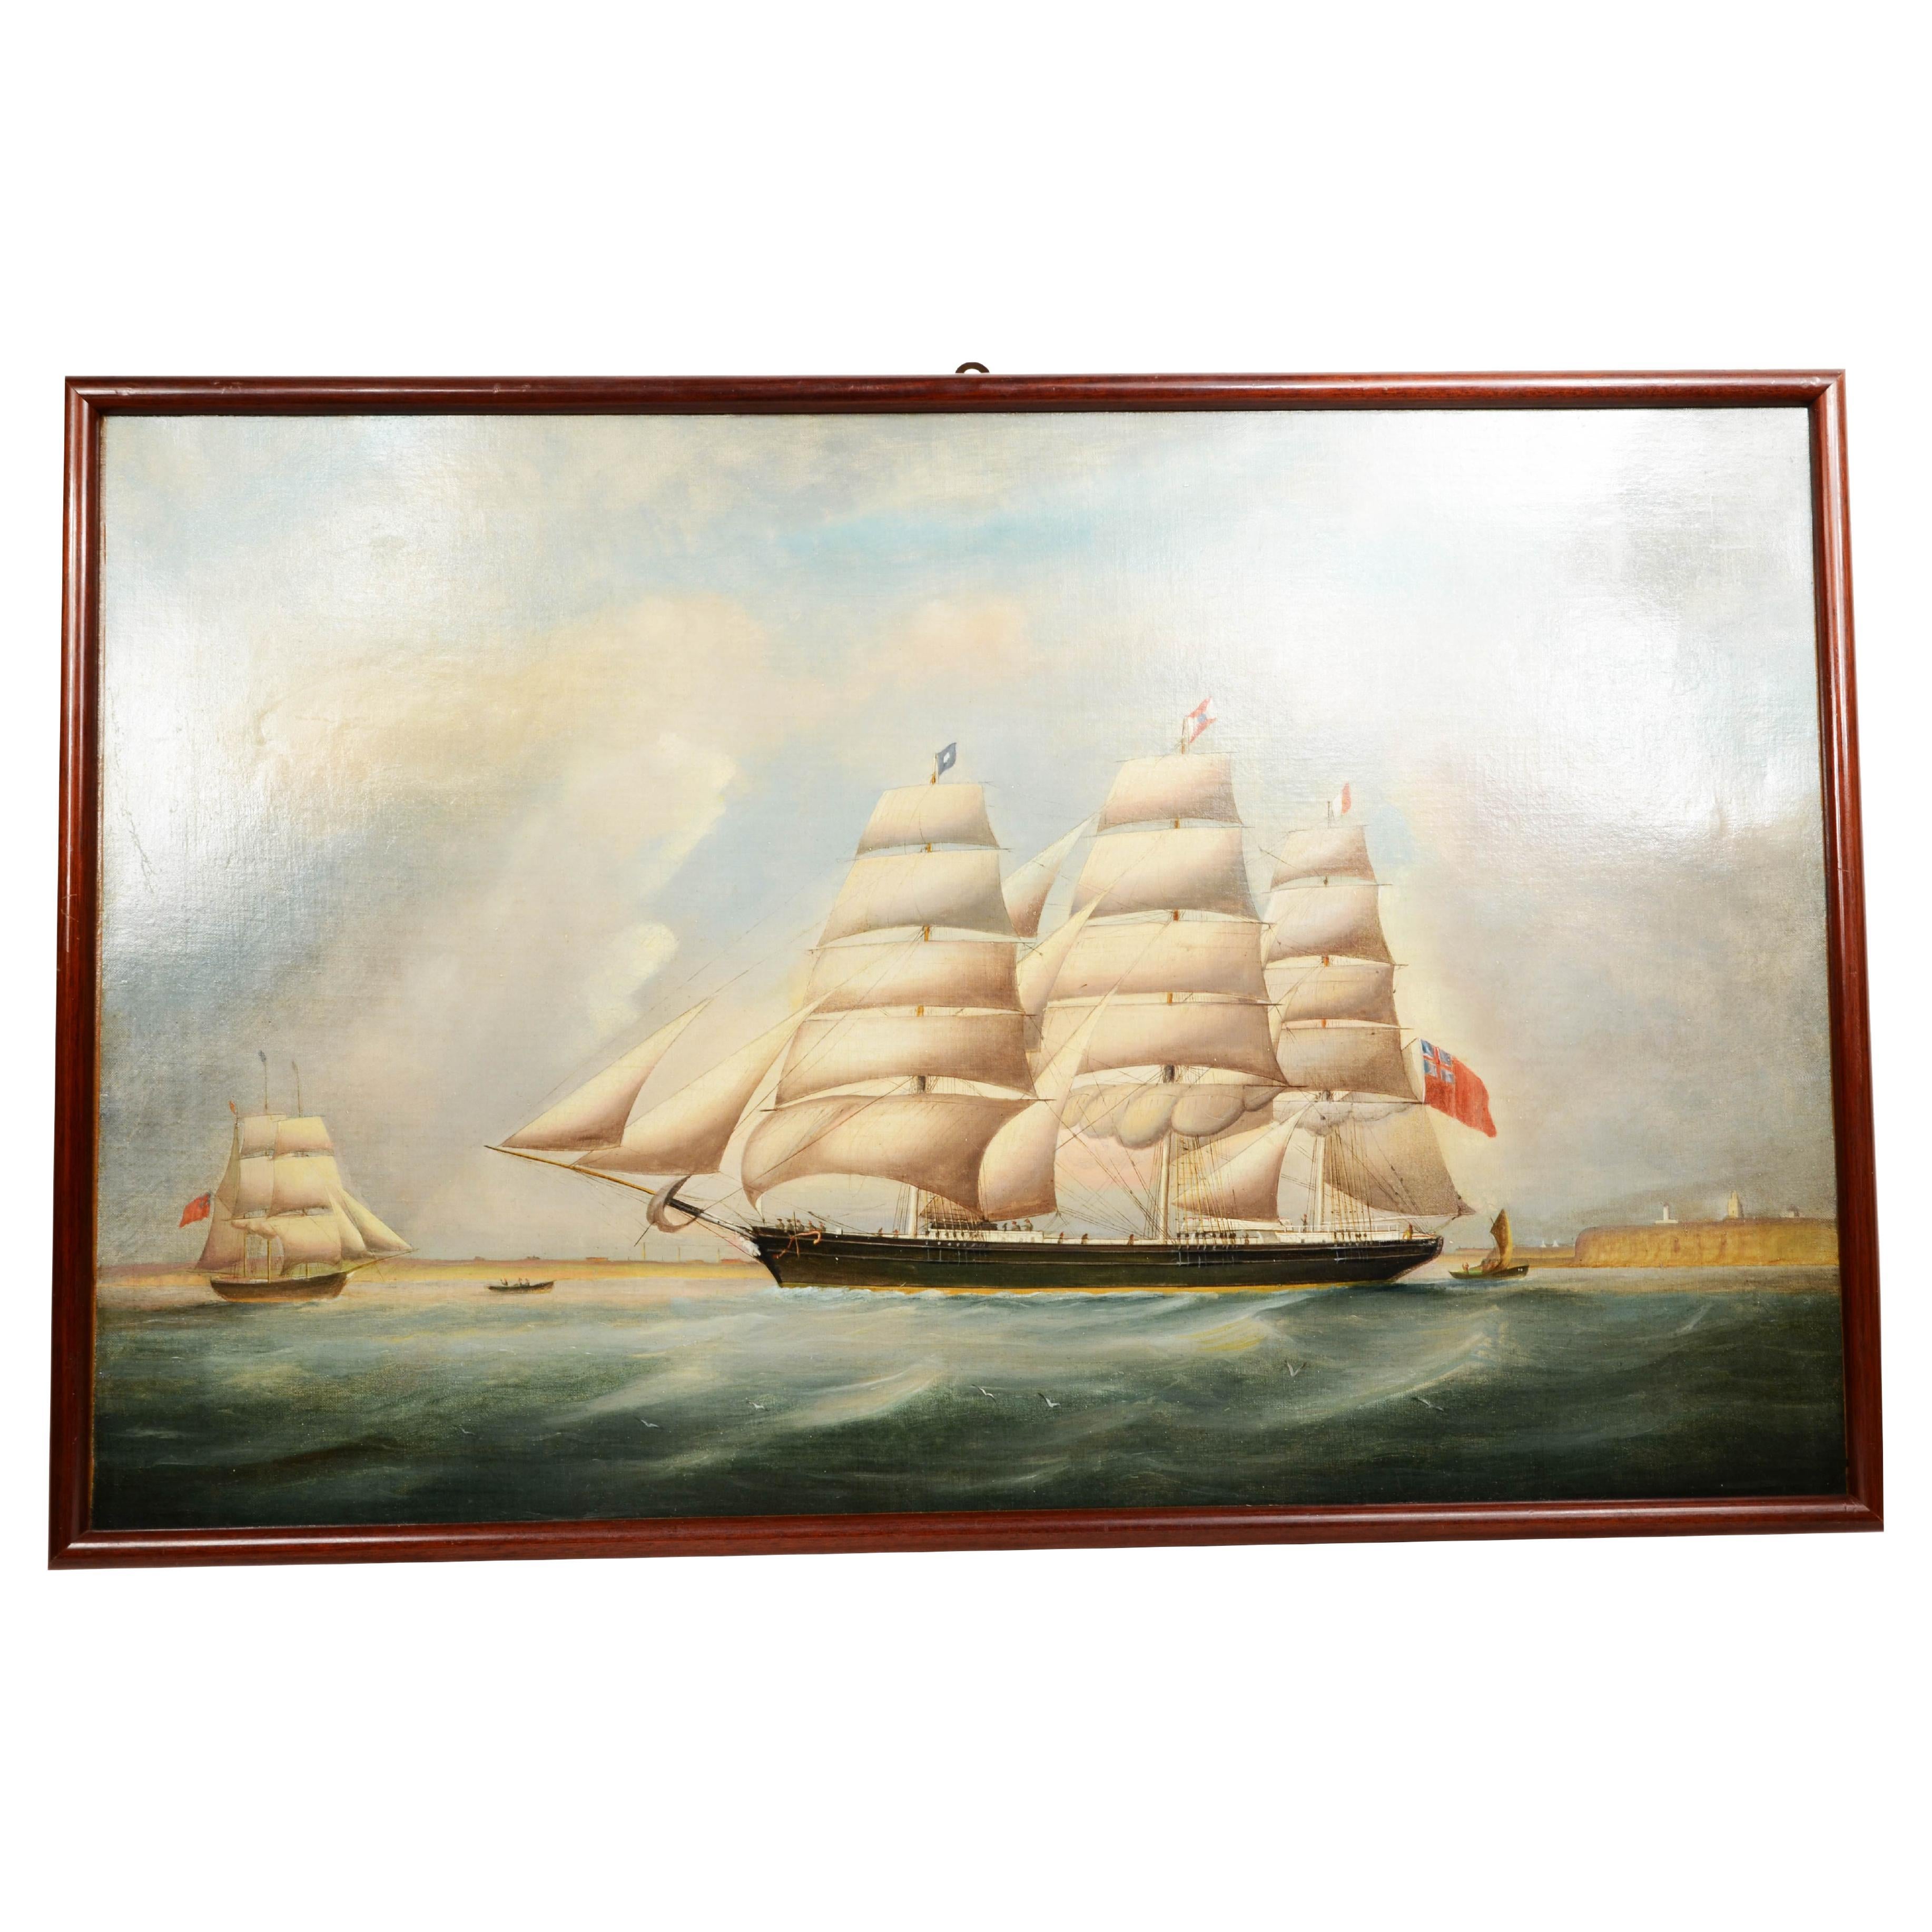 Oil on canvas, antique portrait of a ship dating from the first half of the 19th century. For Sale